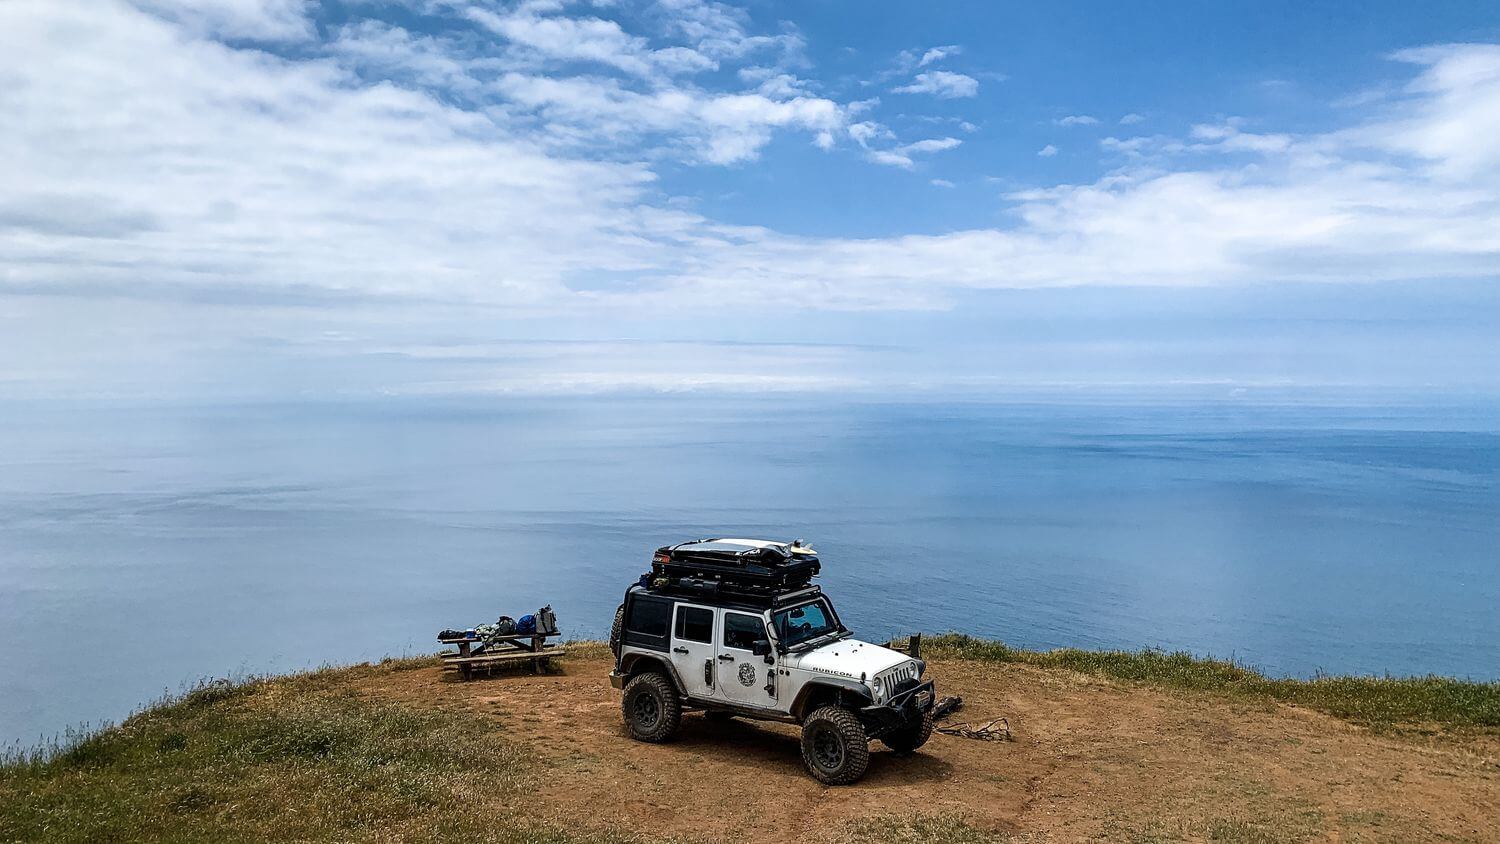 Sandpiper rooftop tent on jeep with surfboards attached